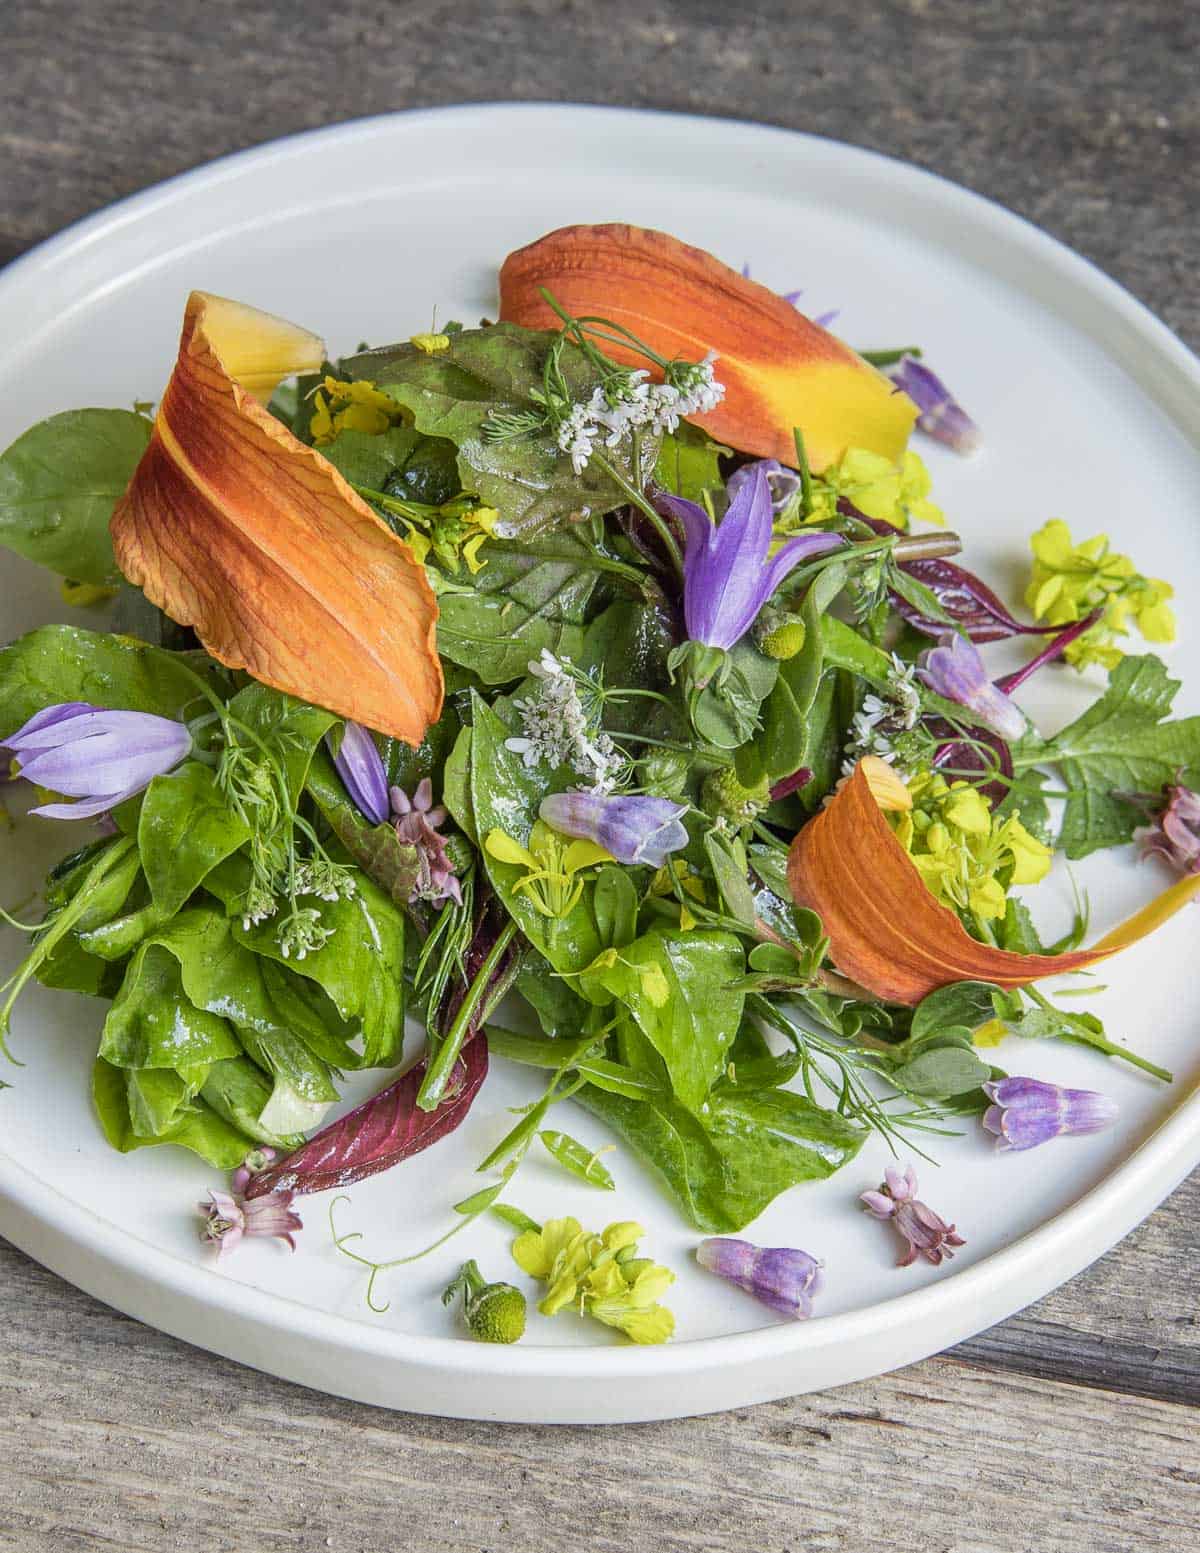 A salad of wild greens garnished with day lily flowers and many others. 